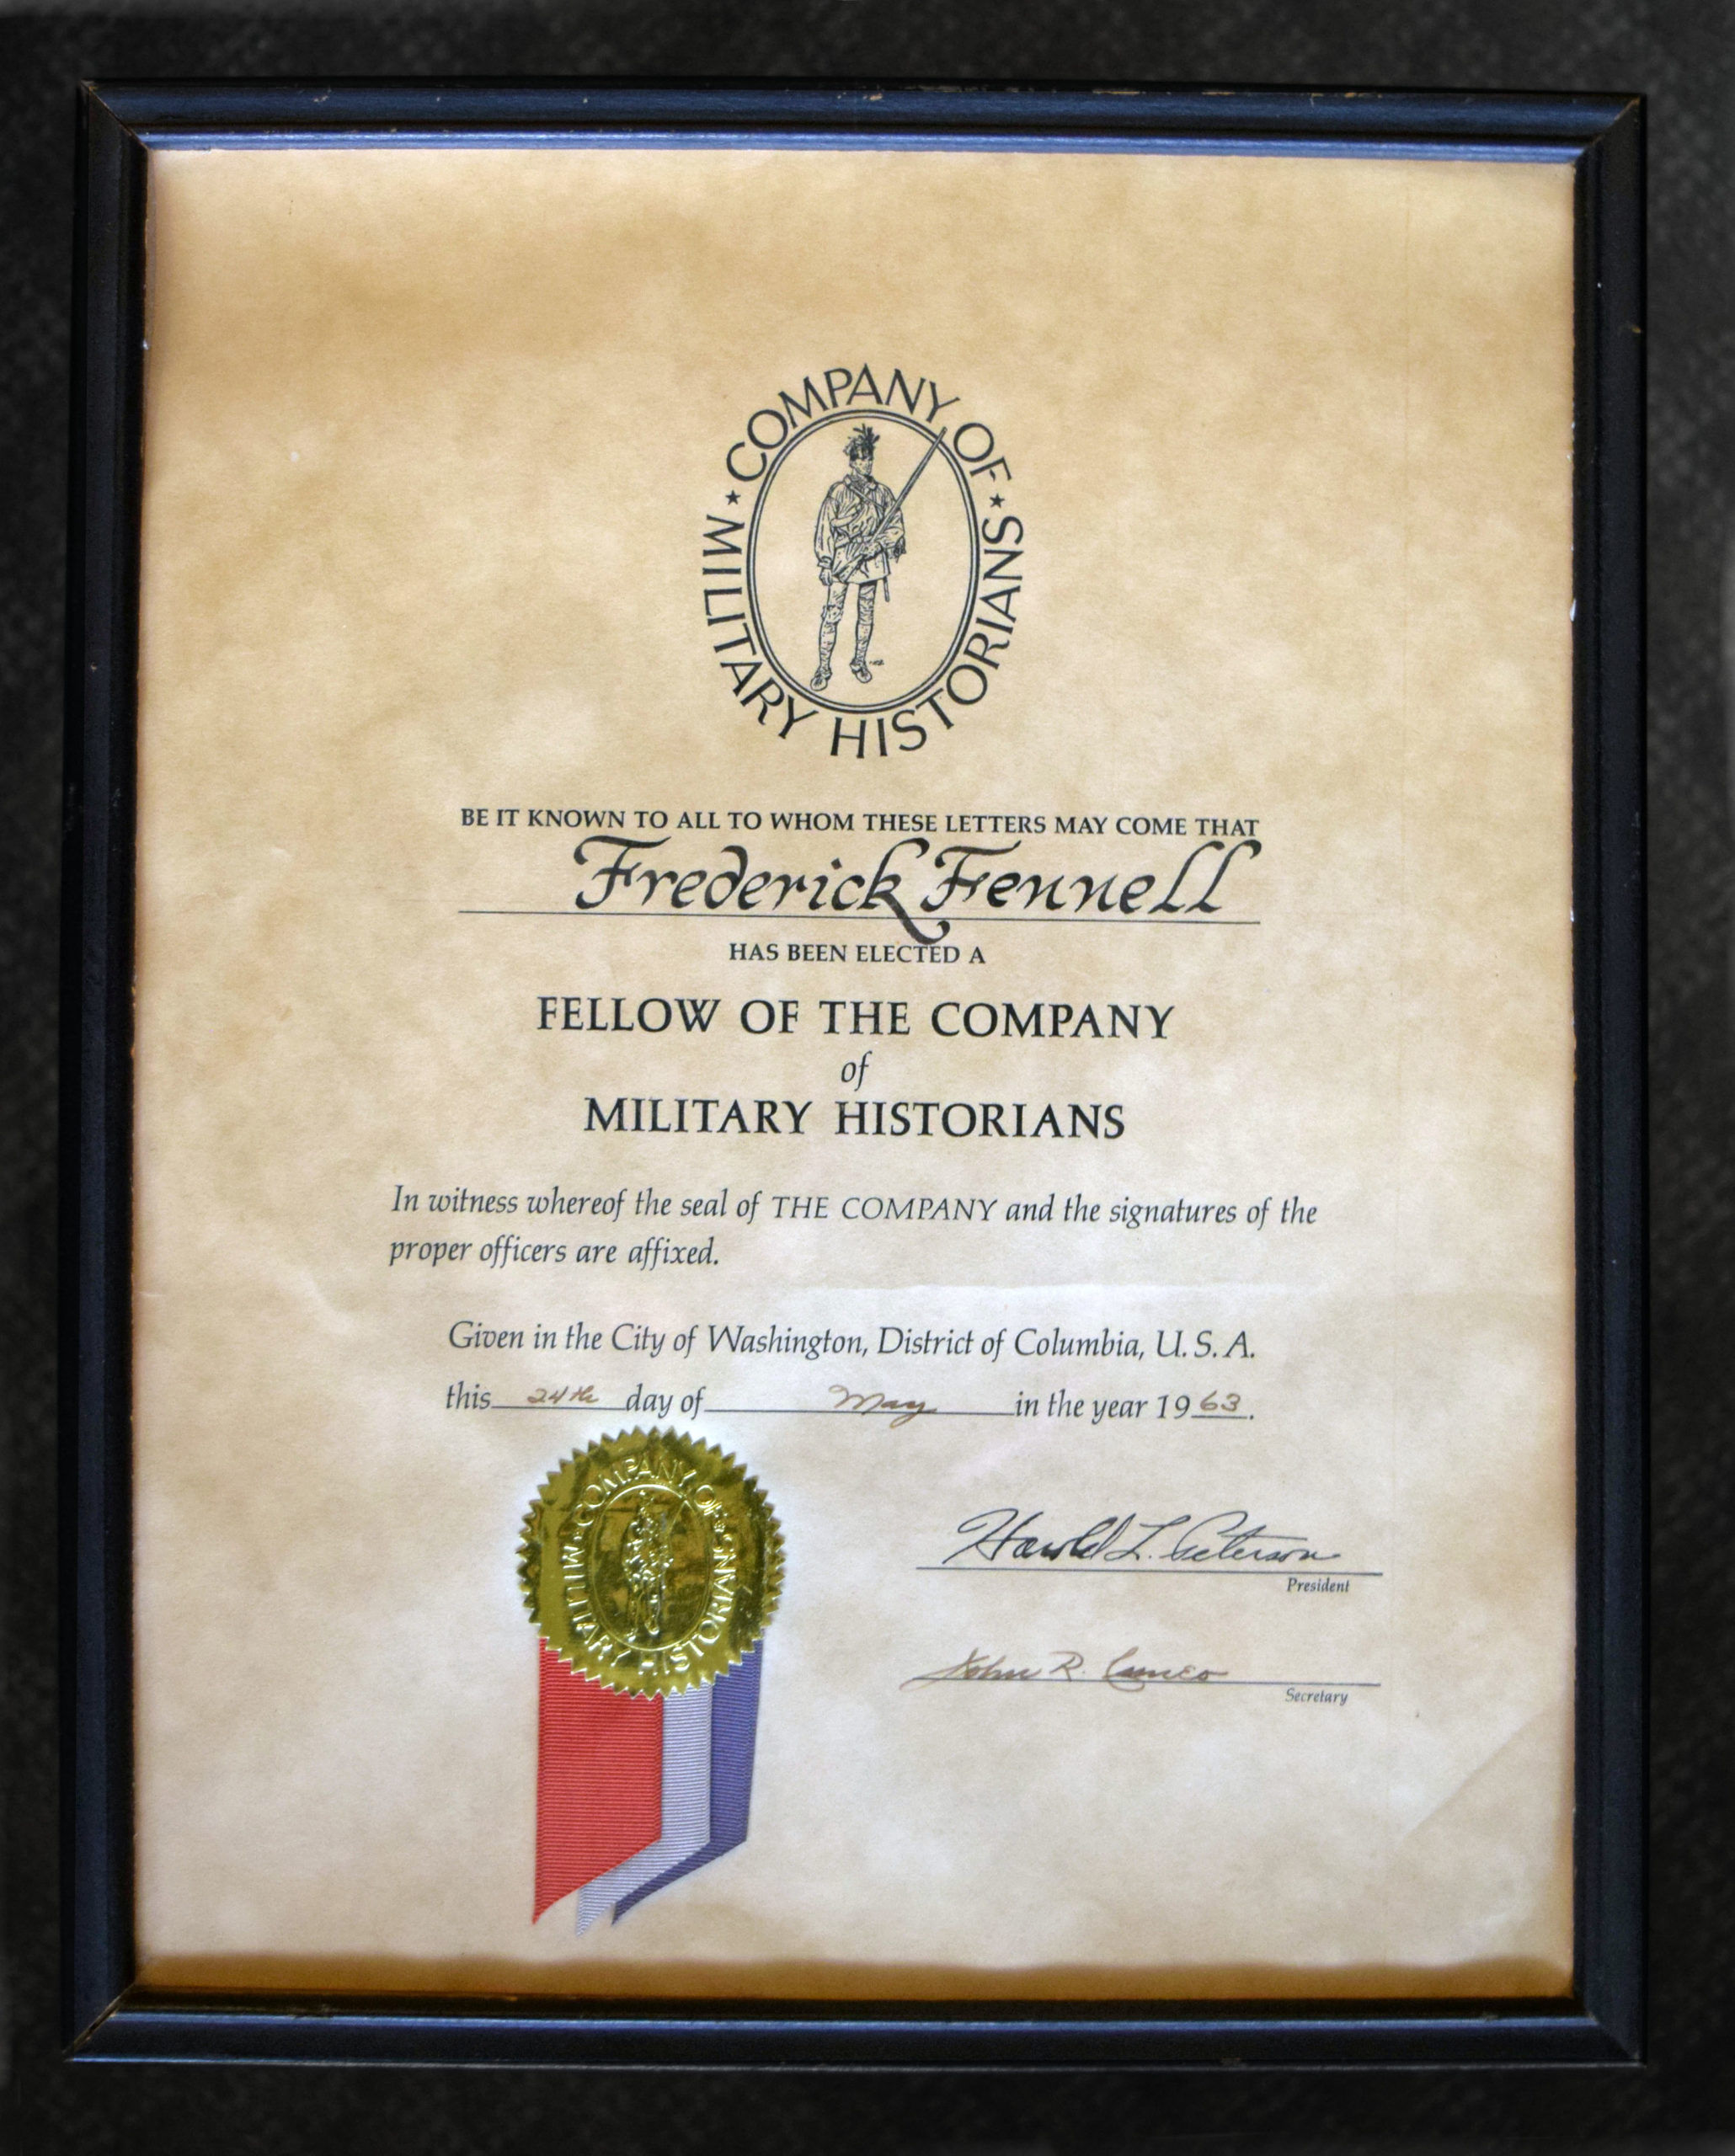 Fellow of the Company of Military Historians